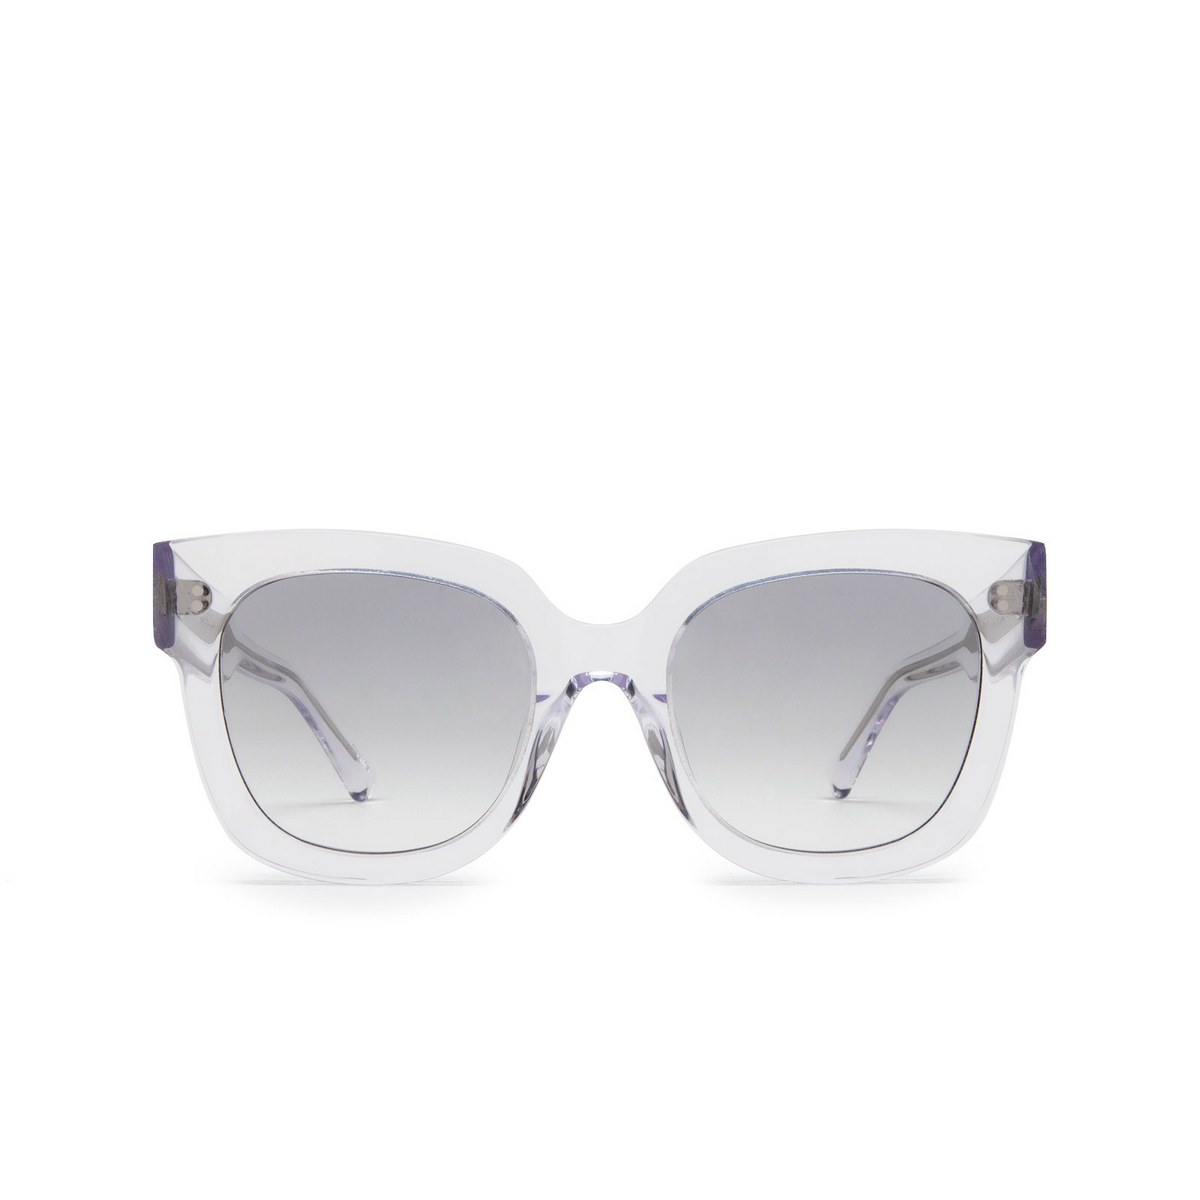 Chimi® Square Sunglasses: 08 color Clear - front view